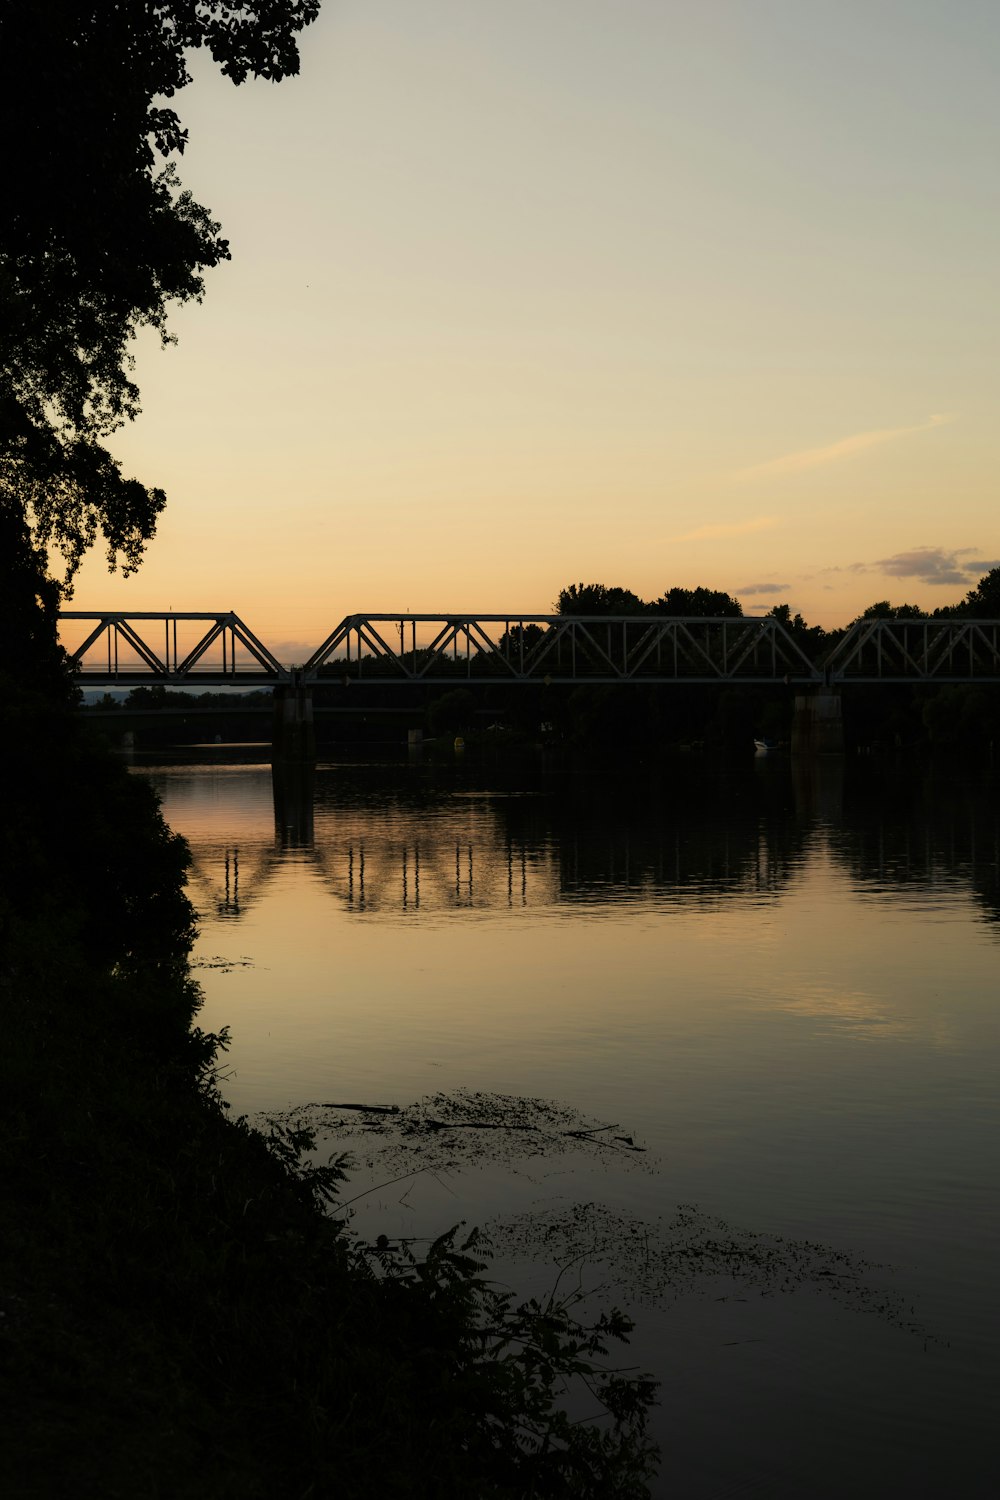 a bridge over a body of water at sunset